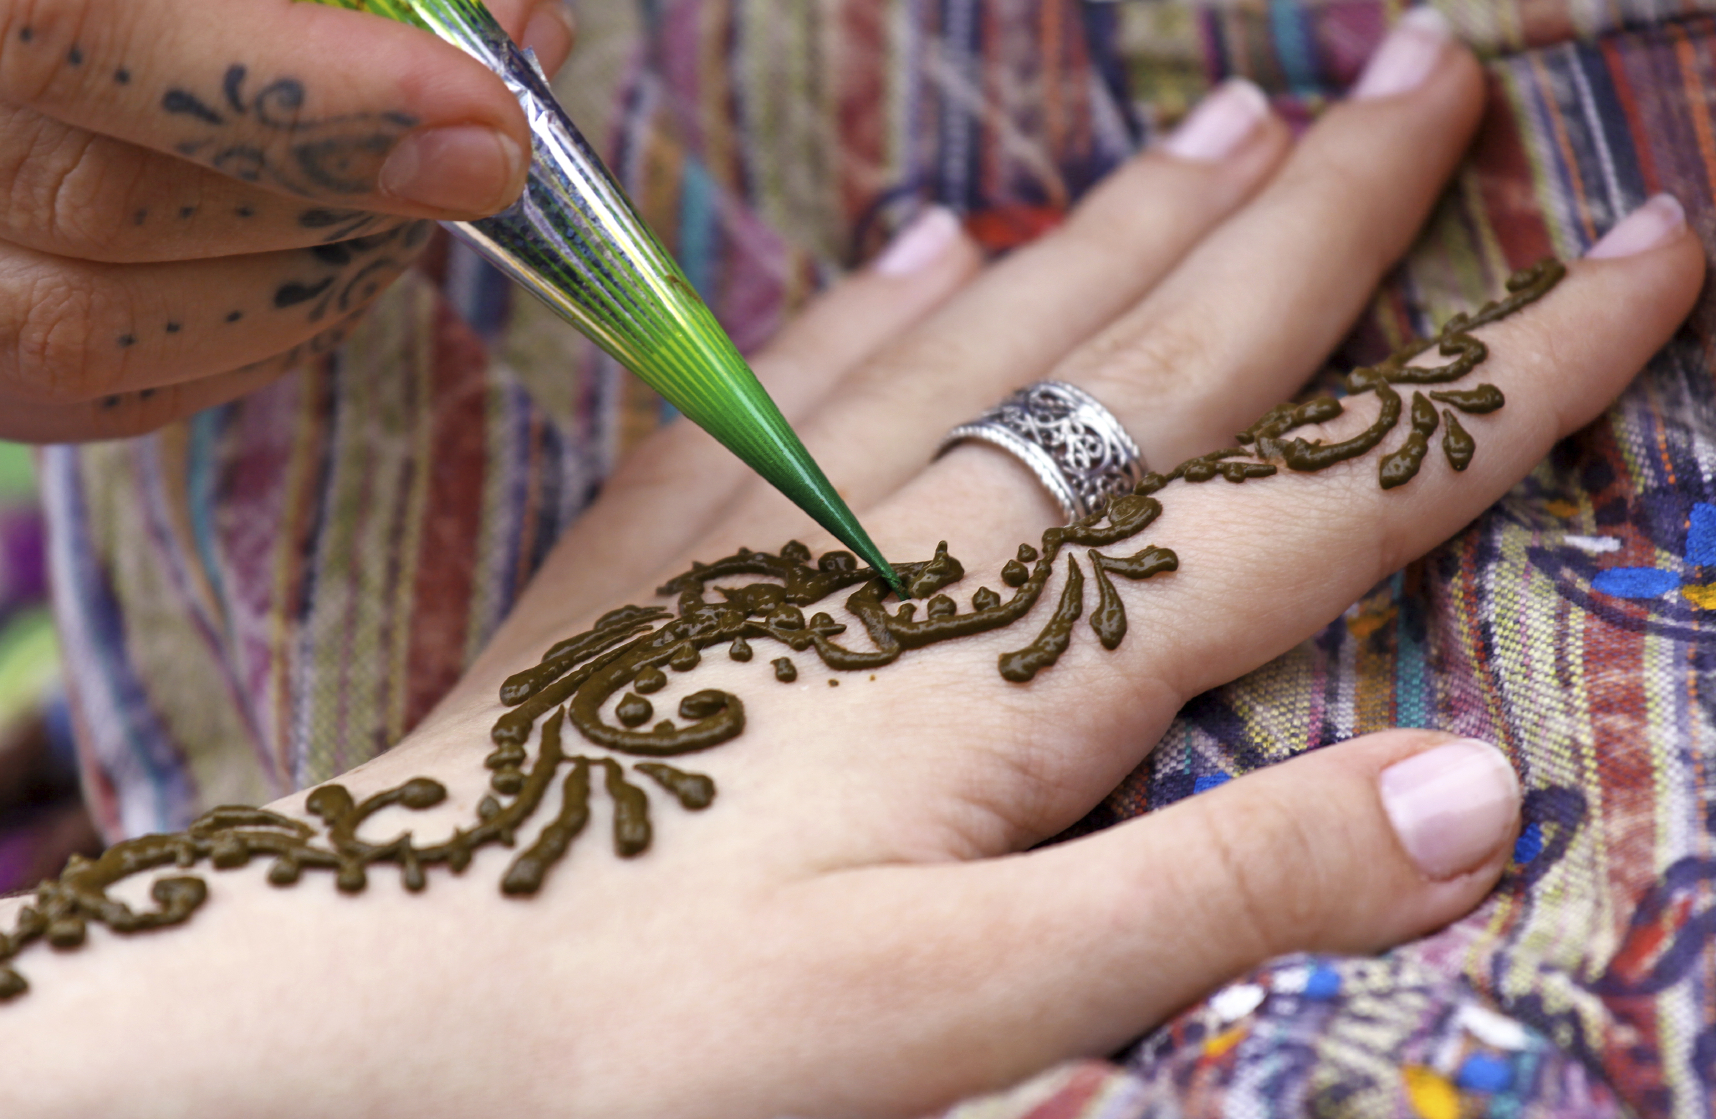 2. The Cultural Significance of Henna Tattoos - wide 5